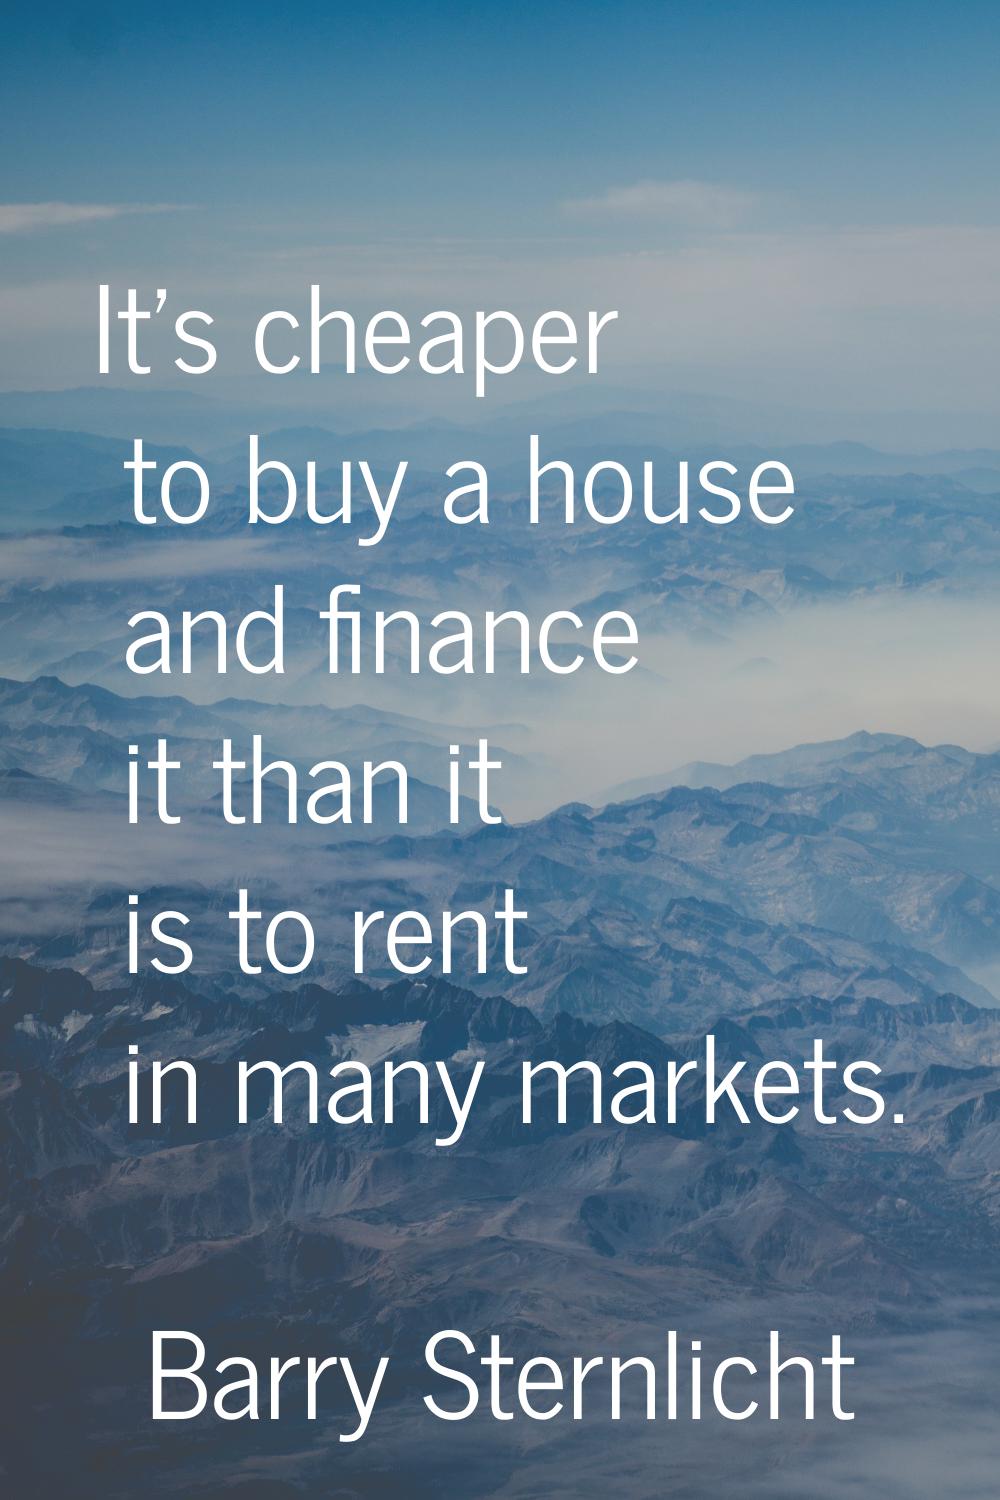 It's cheaper to buy a house and finance it than it is to rent in many markets.